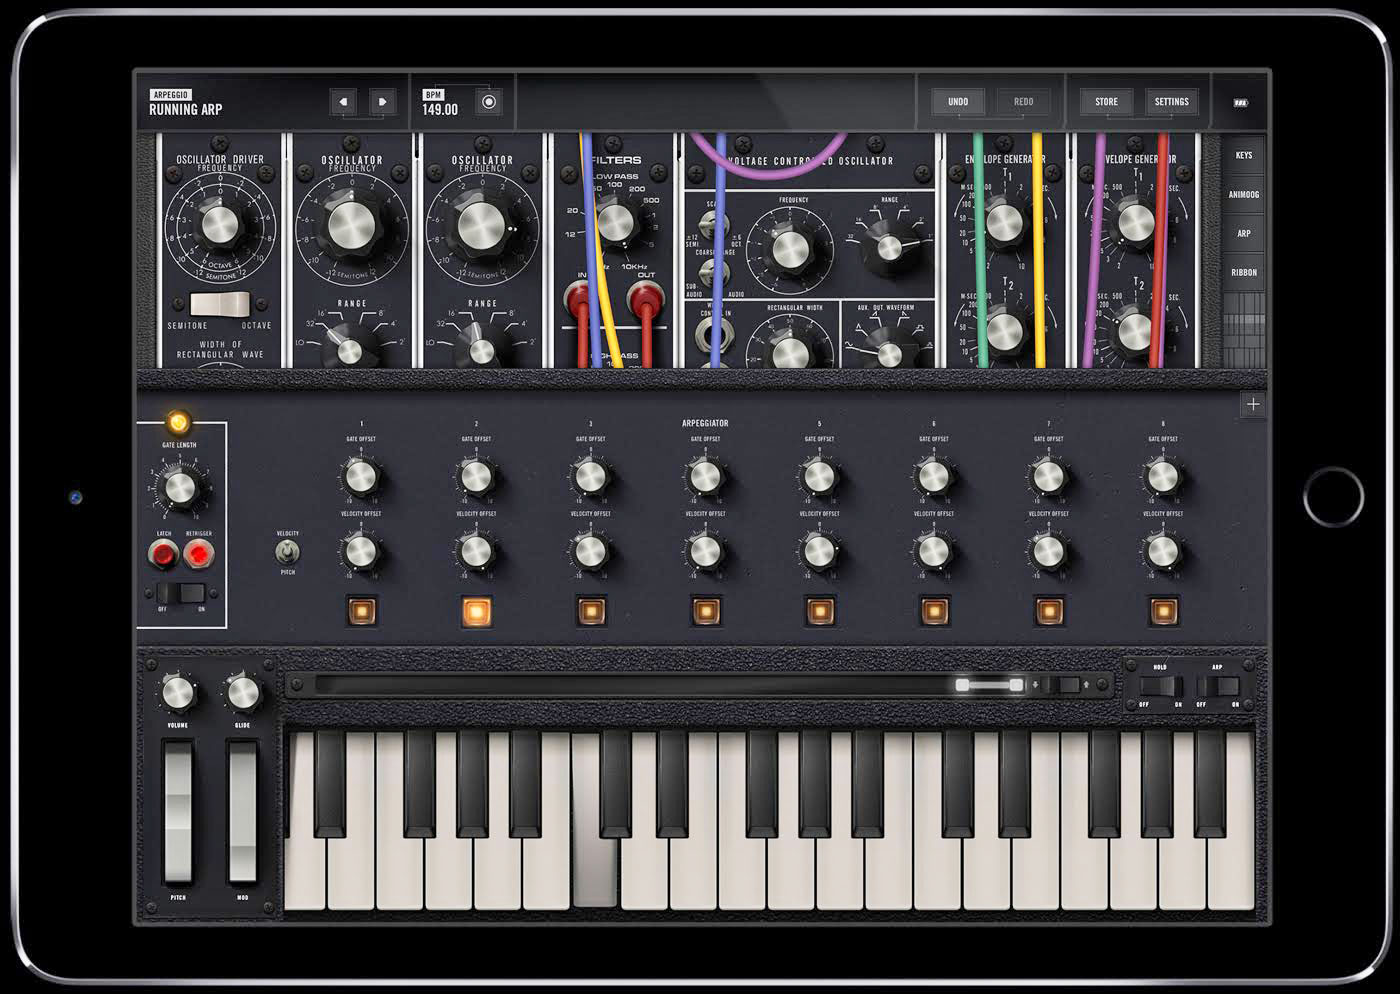 Moog&#039;s new app brings the iconic Model 15 synth to your iPad